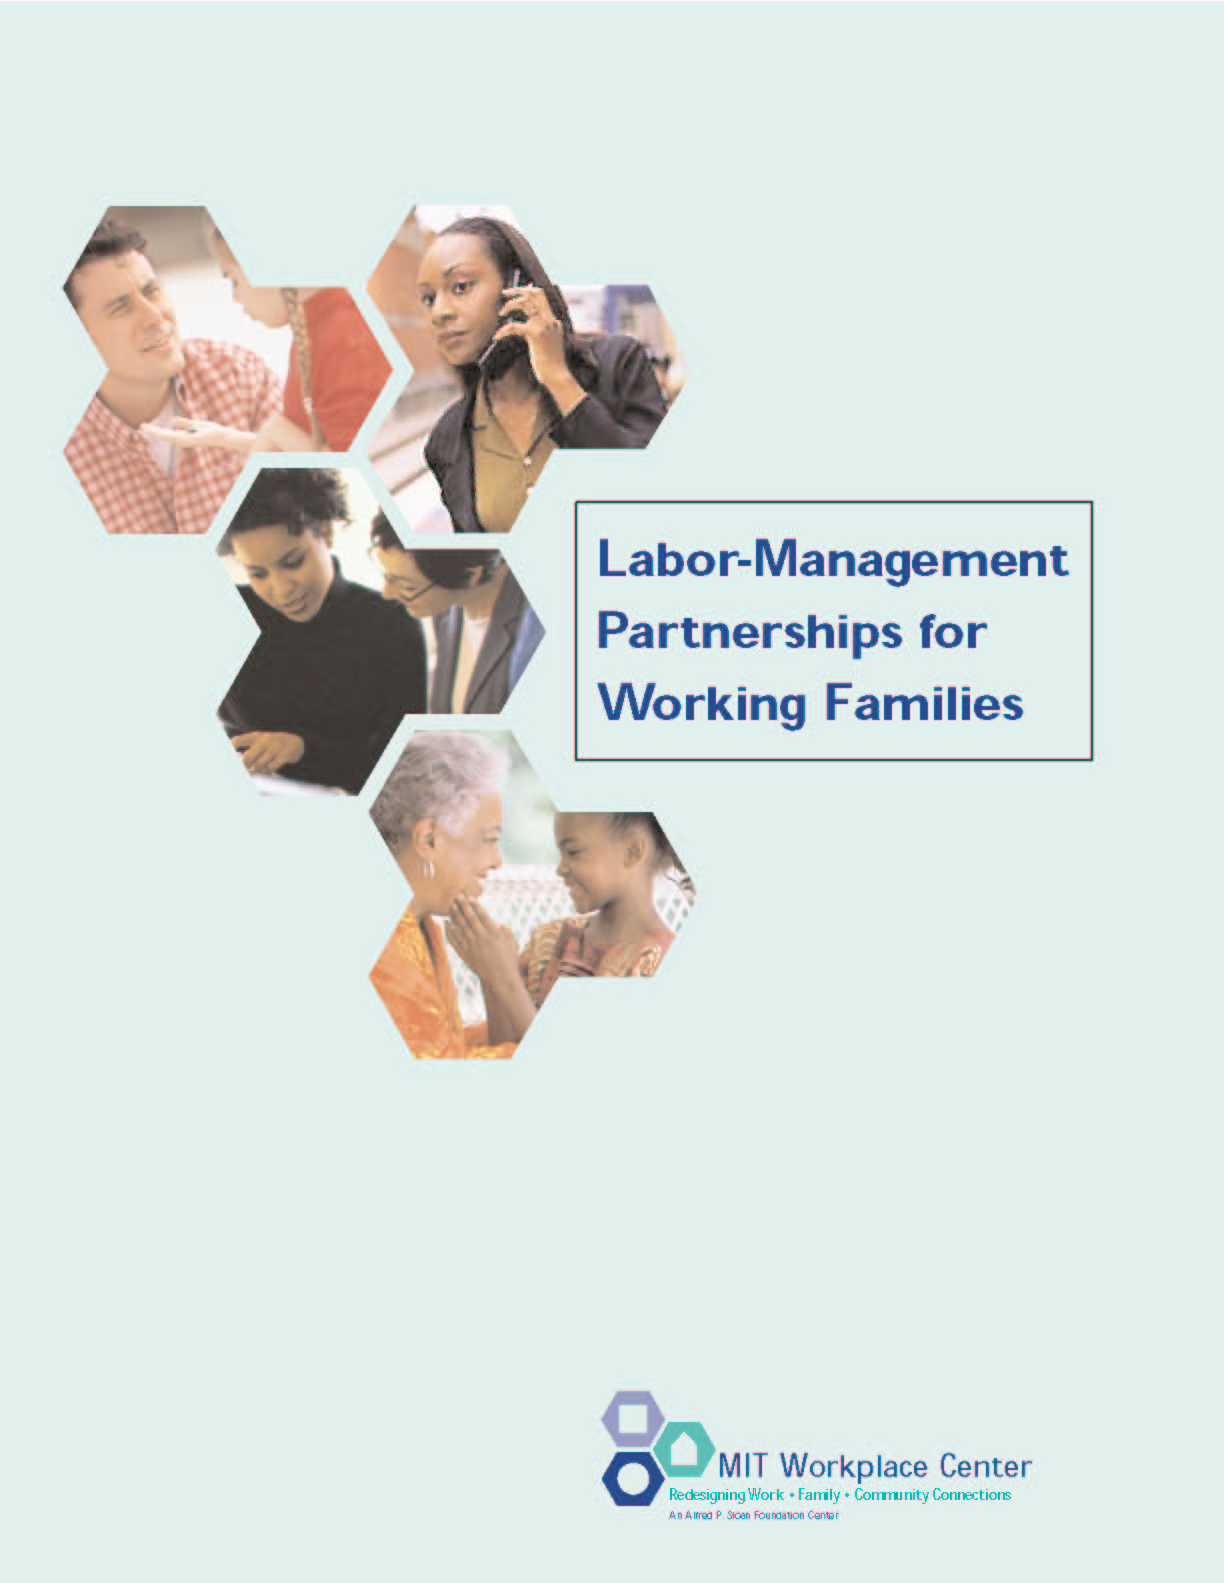 Labor-Management Partnerships for Working Families